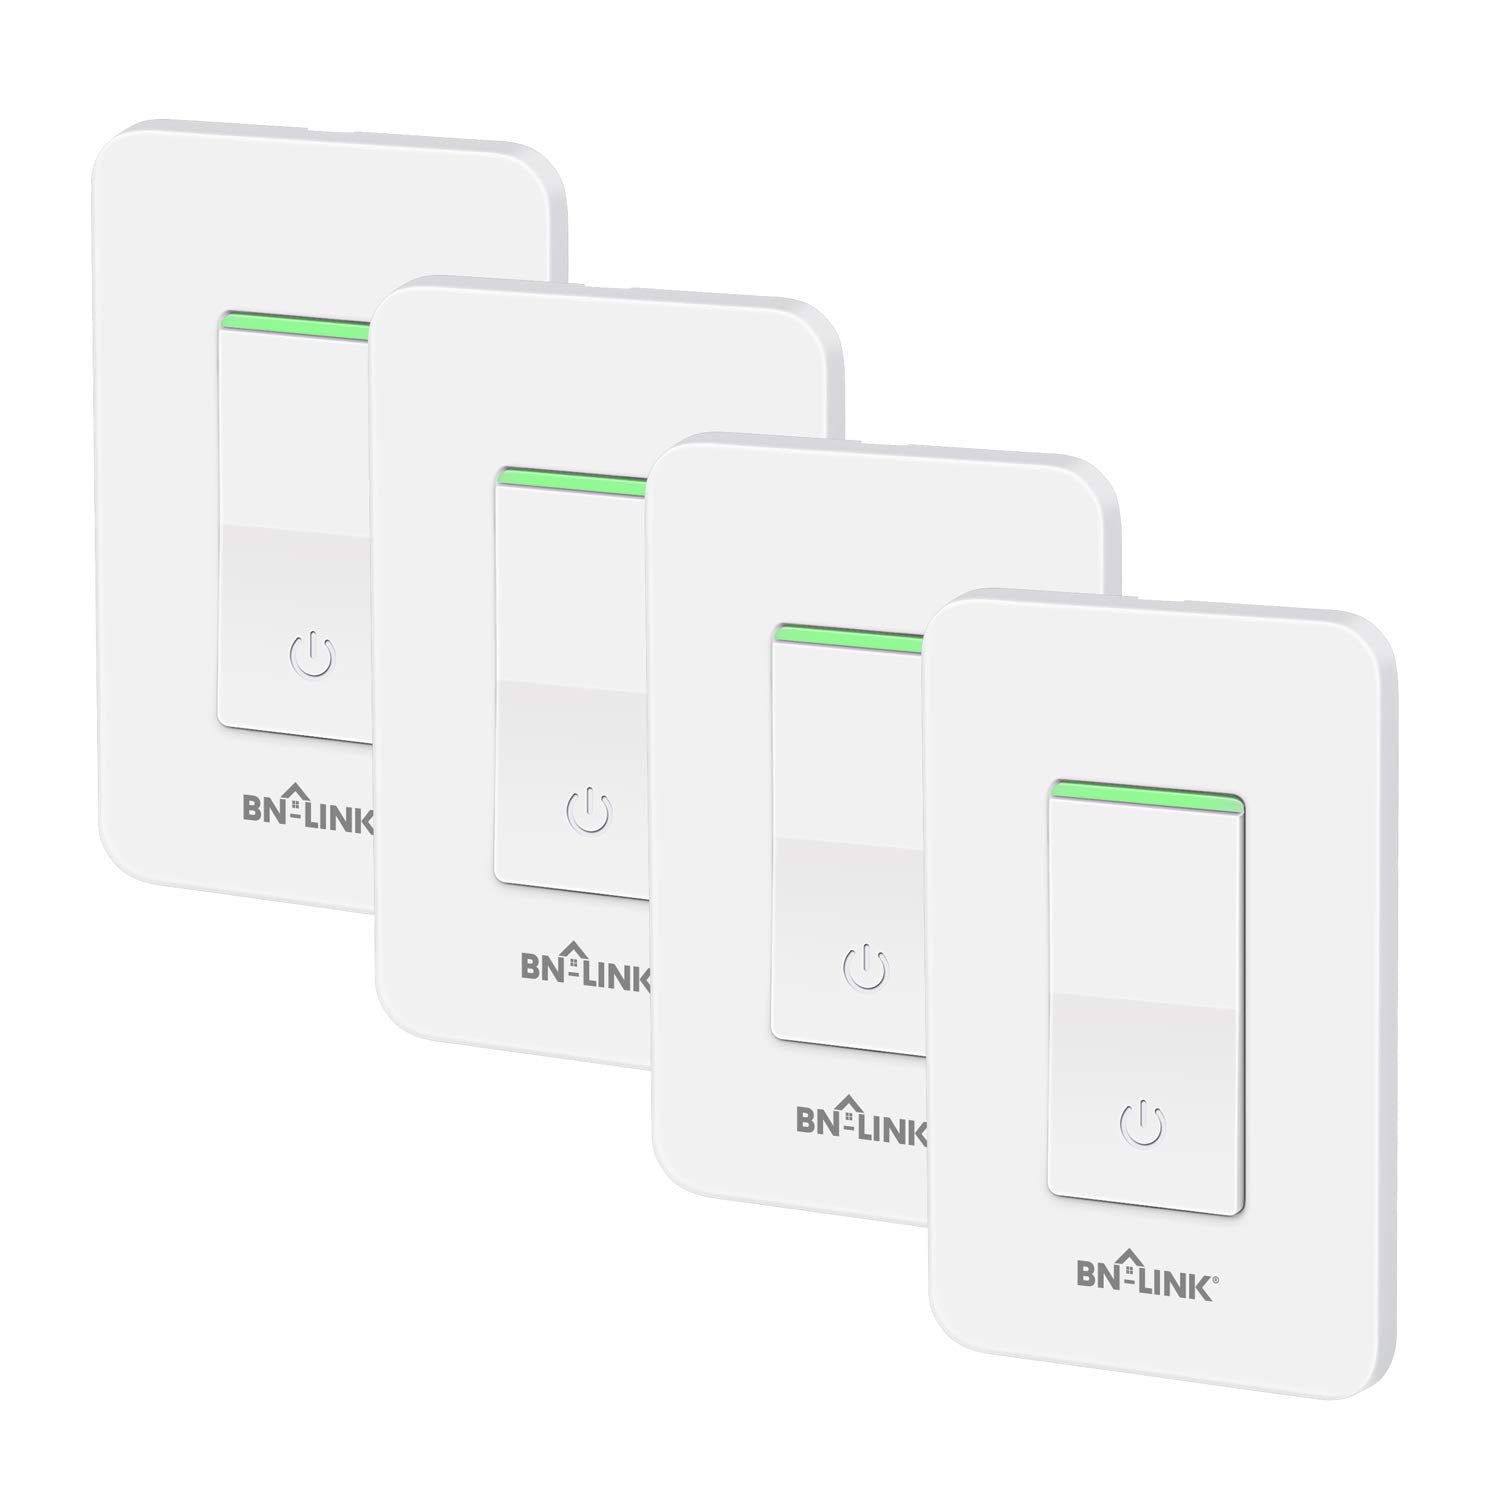 WiFi Smart Light Switch Timer Function Compatible Function (4 BN-LINK - BN-LINK